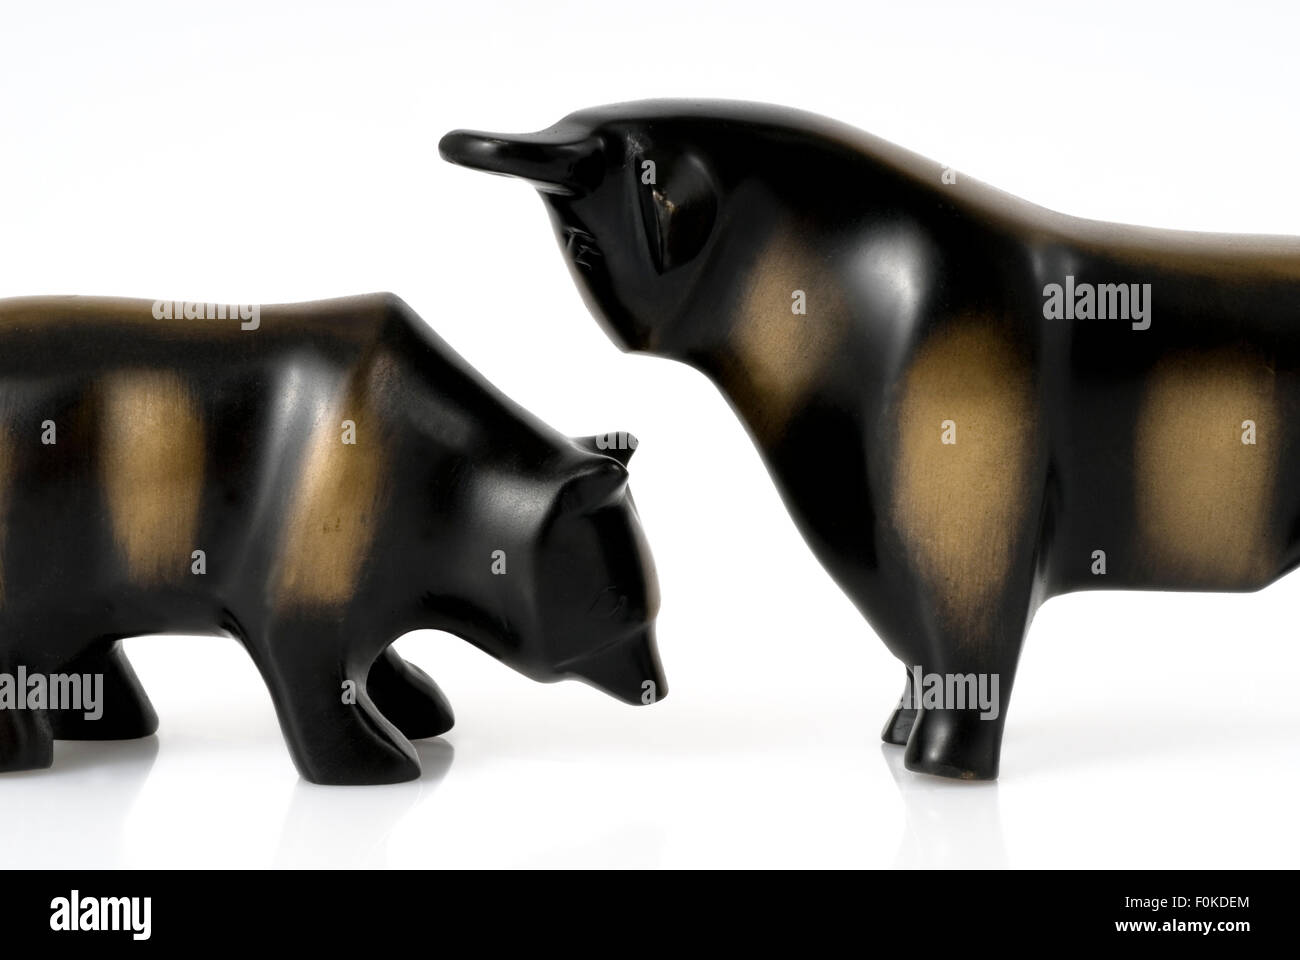 Bear and bull sculptures symbolized the Frankfurt stock exchange Stock Photo